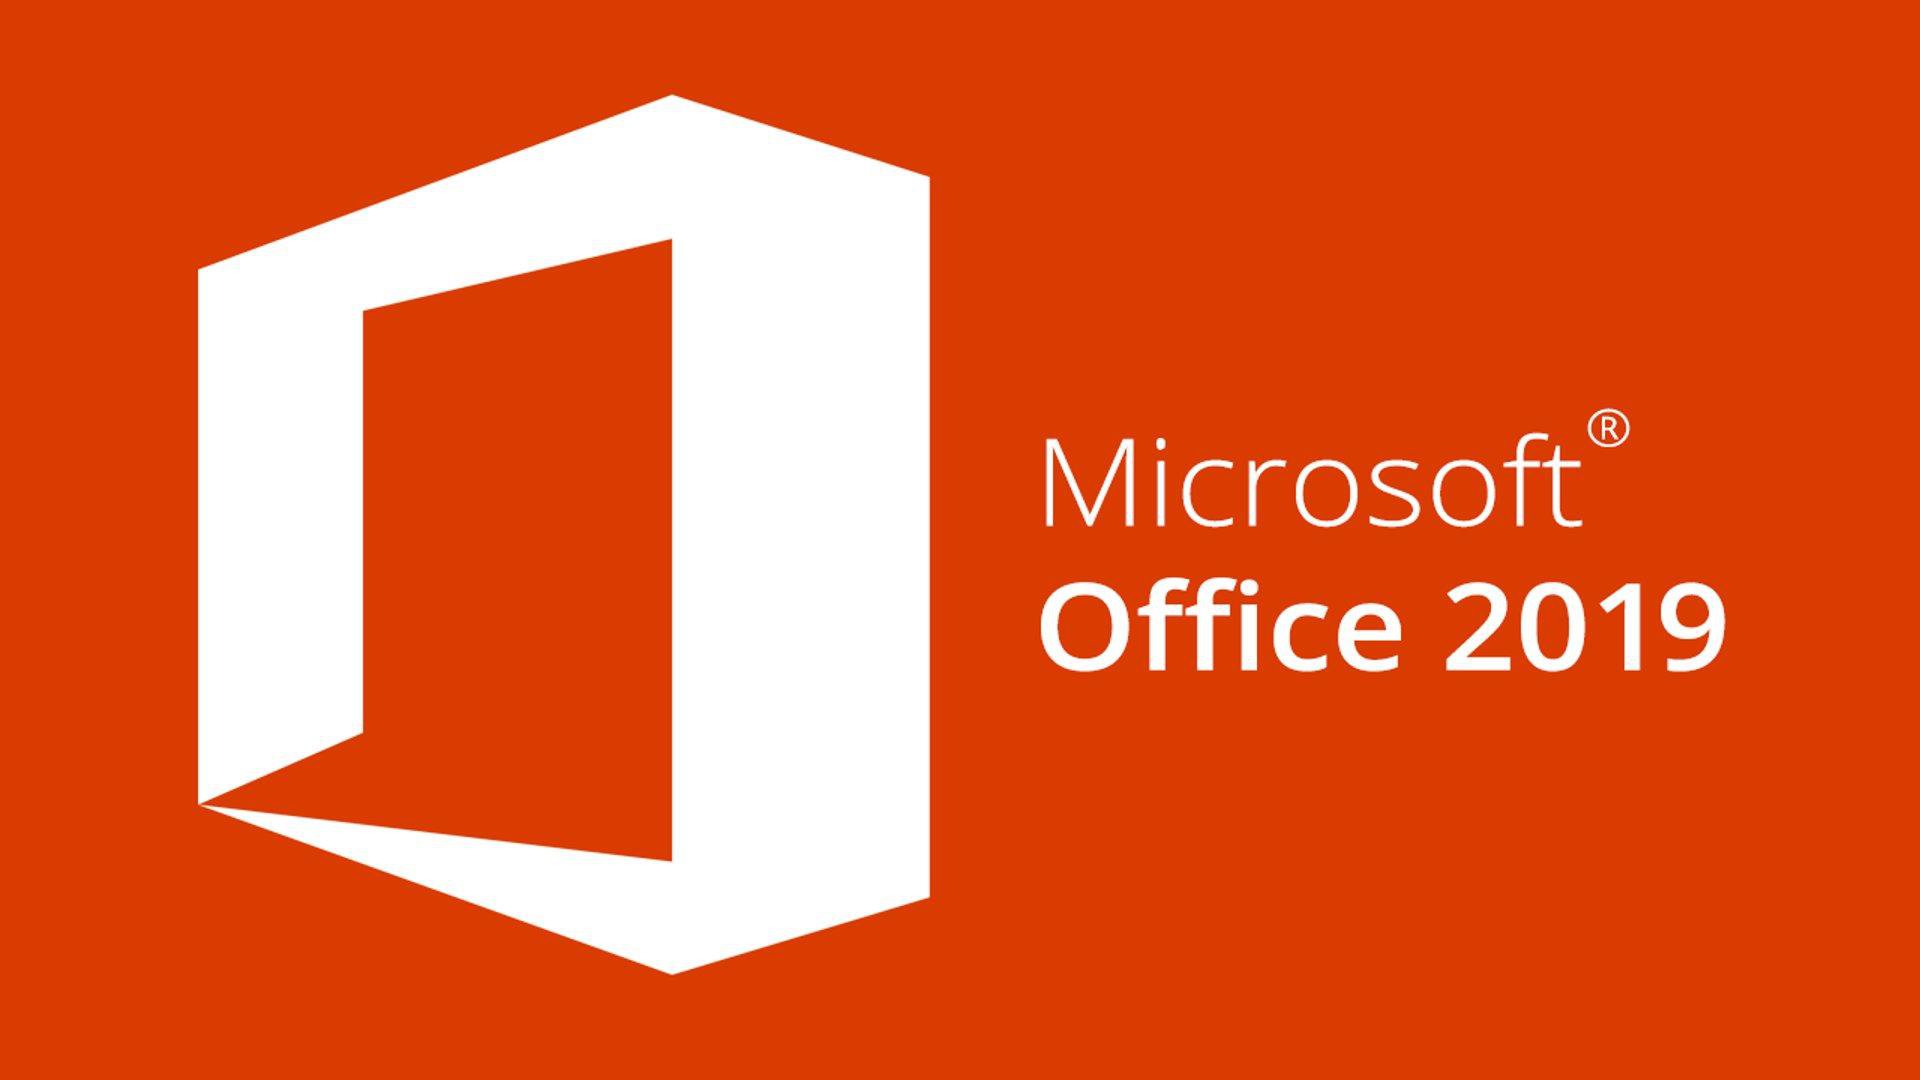 Microsoft Office 2019 Home and Student 2